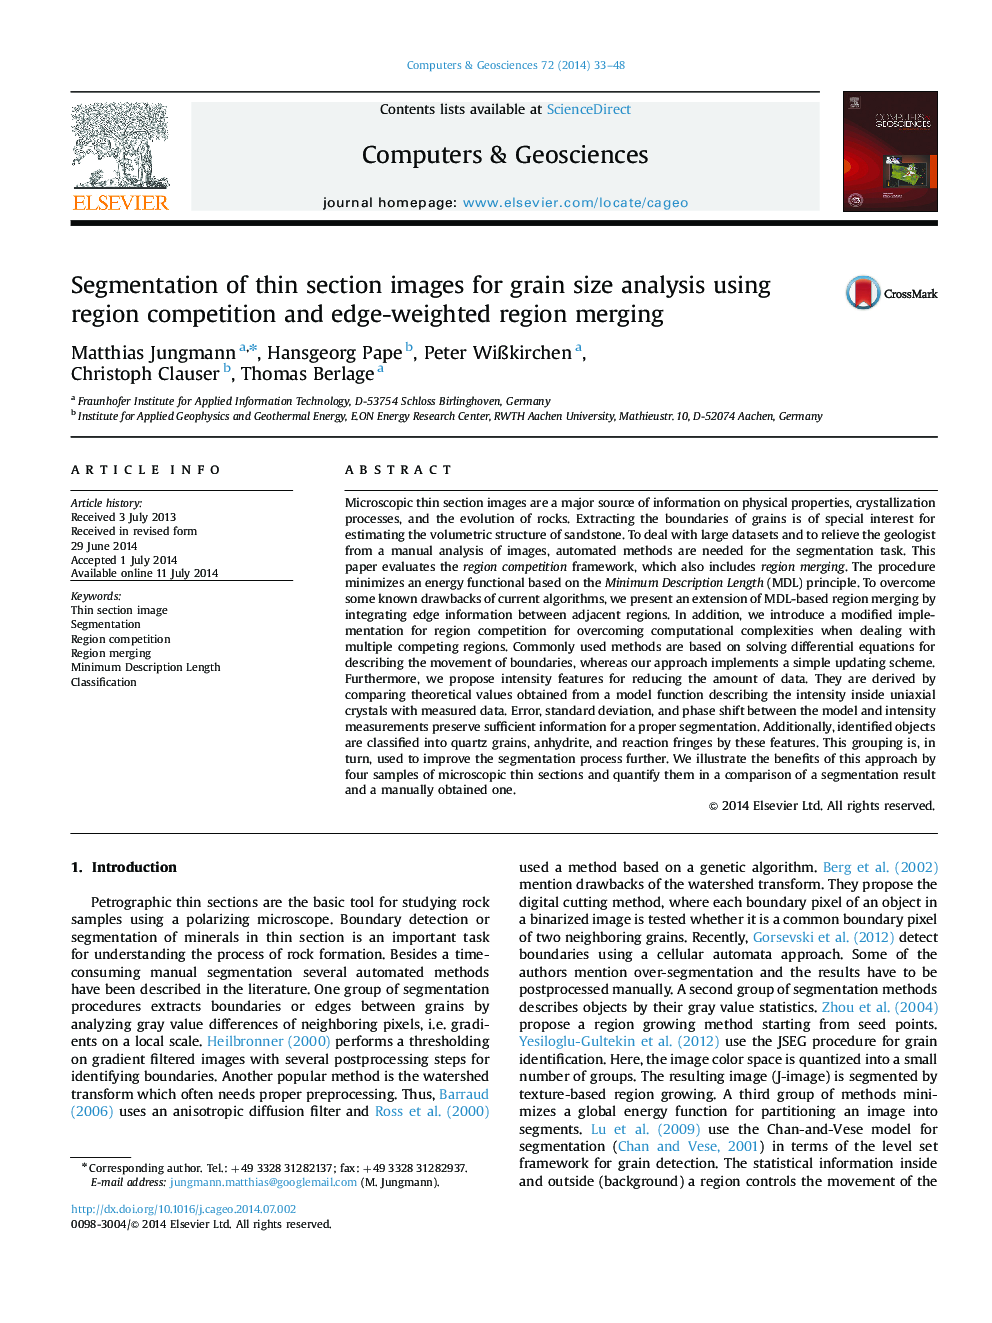 Segmentation of thin section images for grain size analysis using region competition and edge-weighted region merging